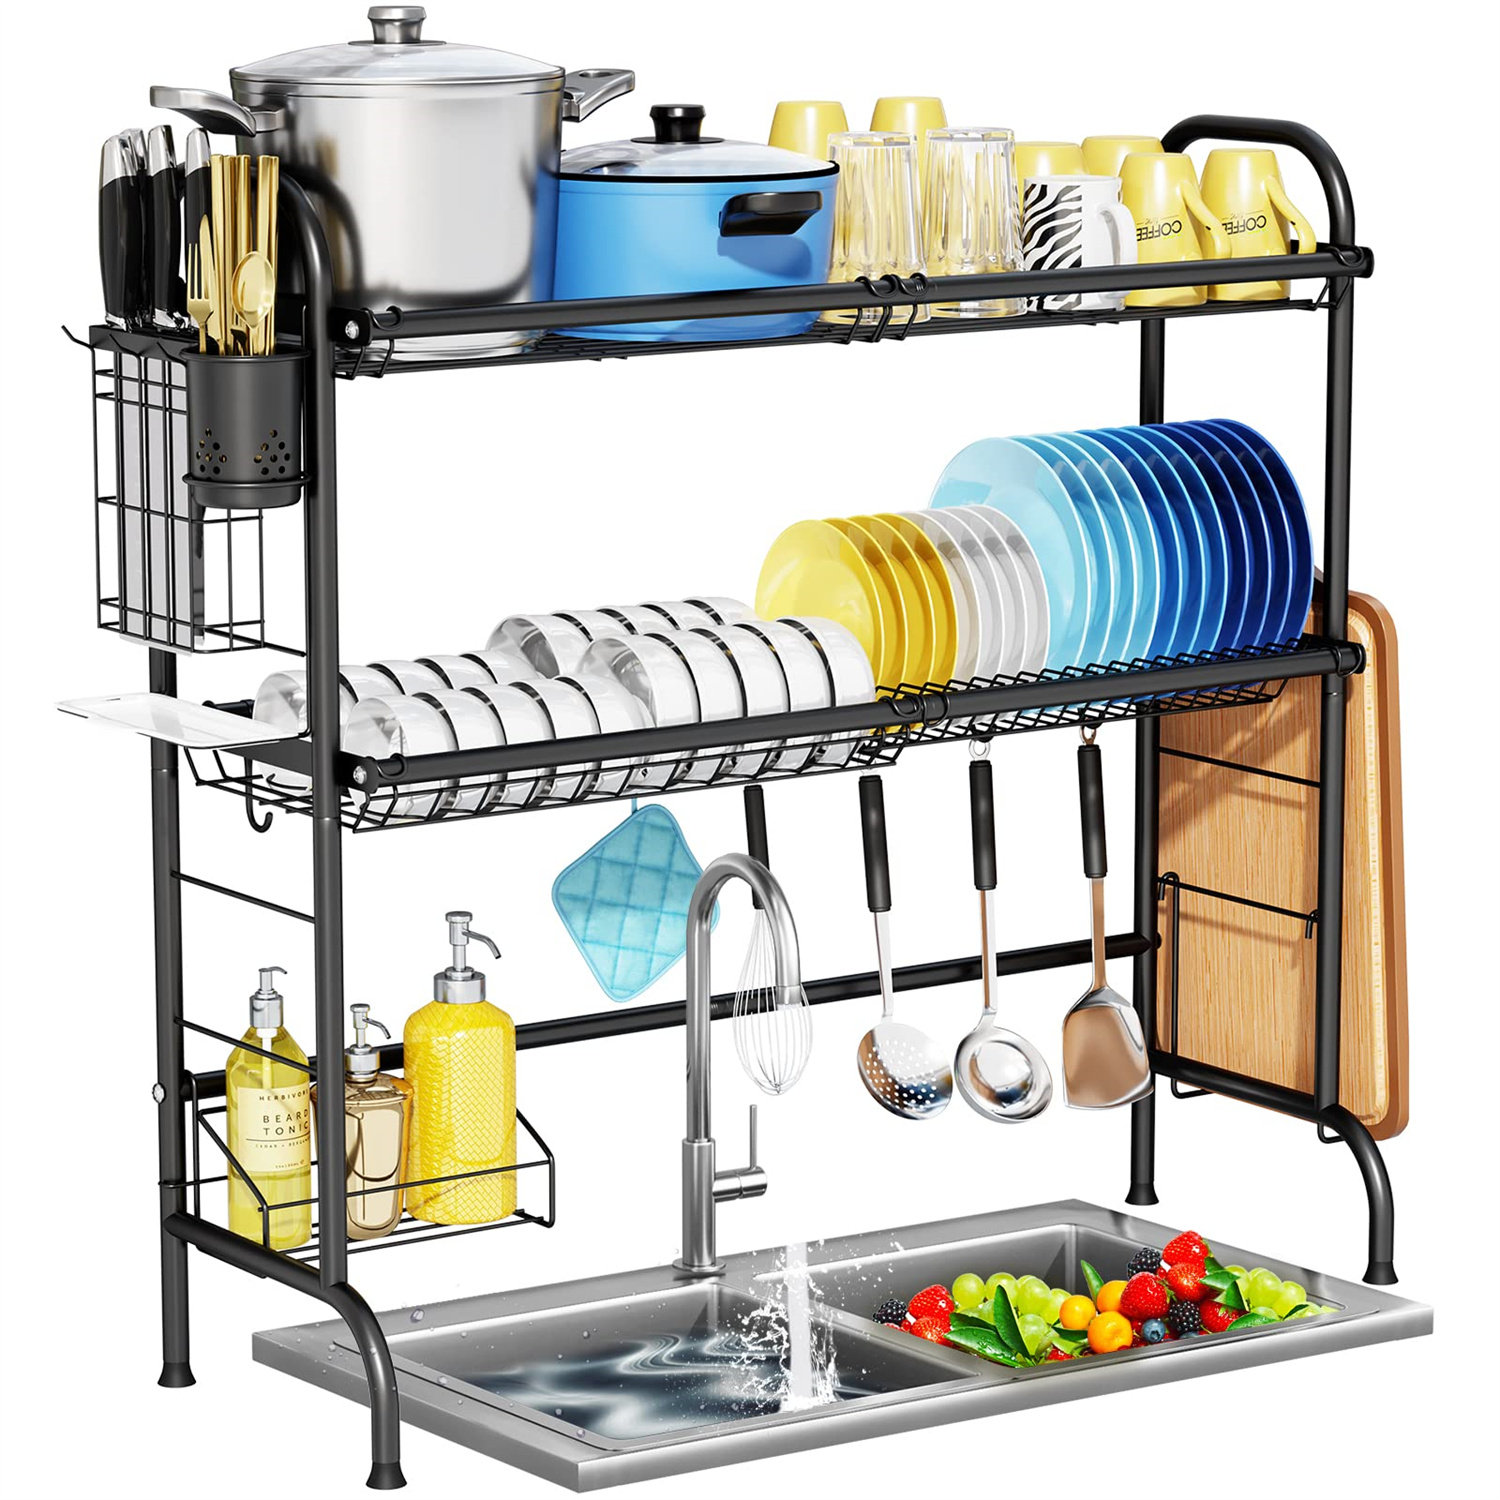 boosiny Large Dish Drying Rack with Drainboard Set, 2 Tier Dish